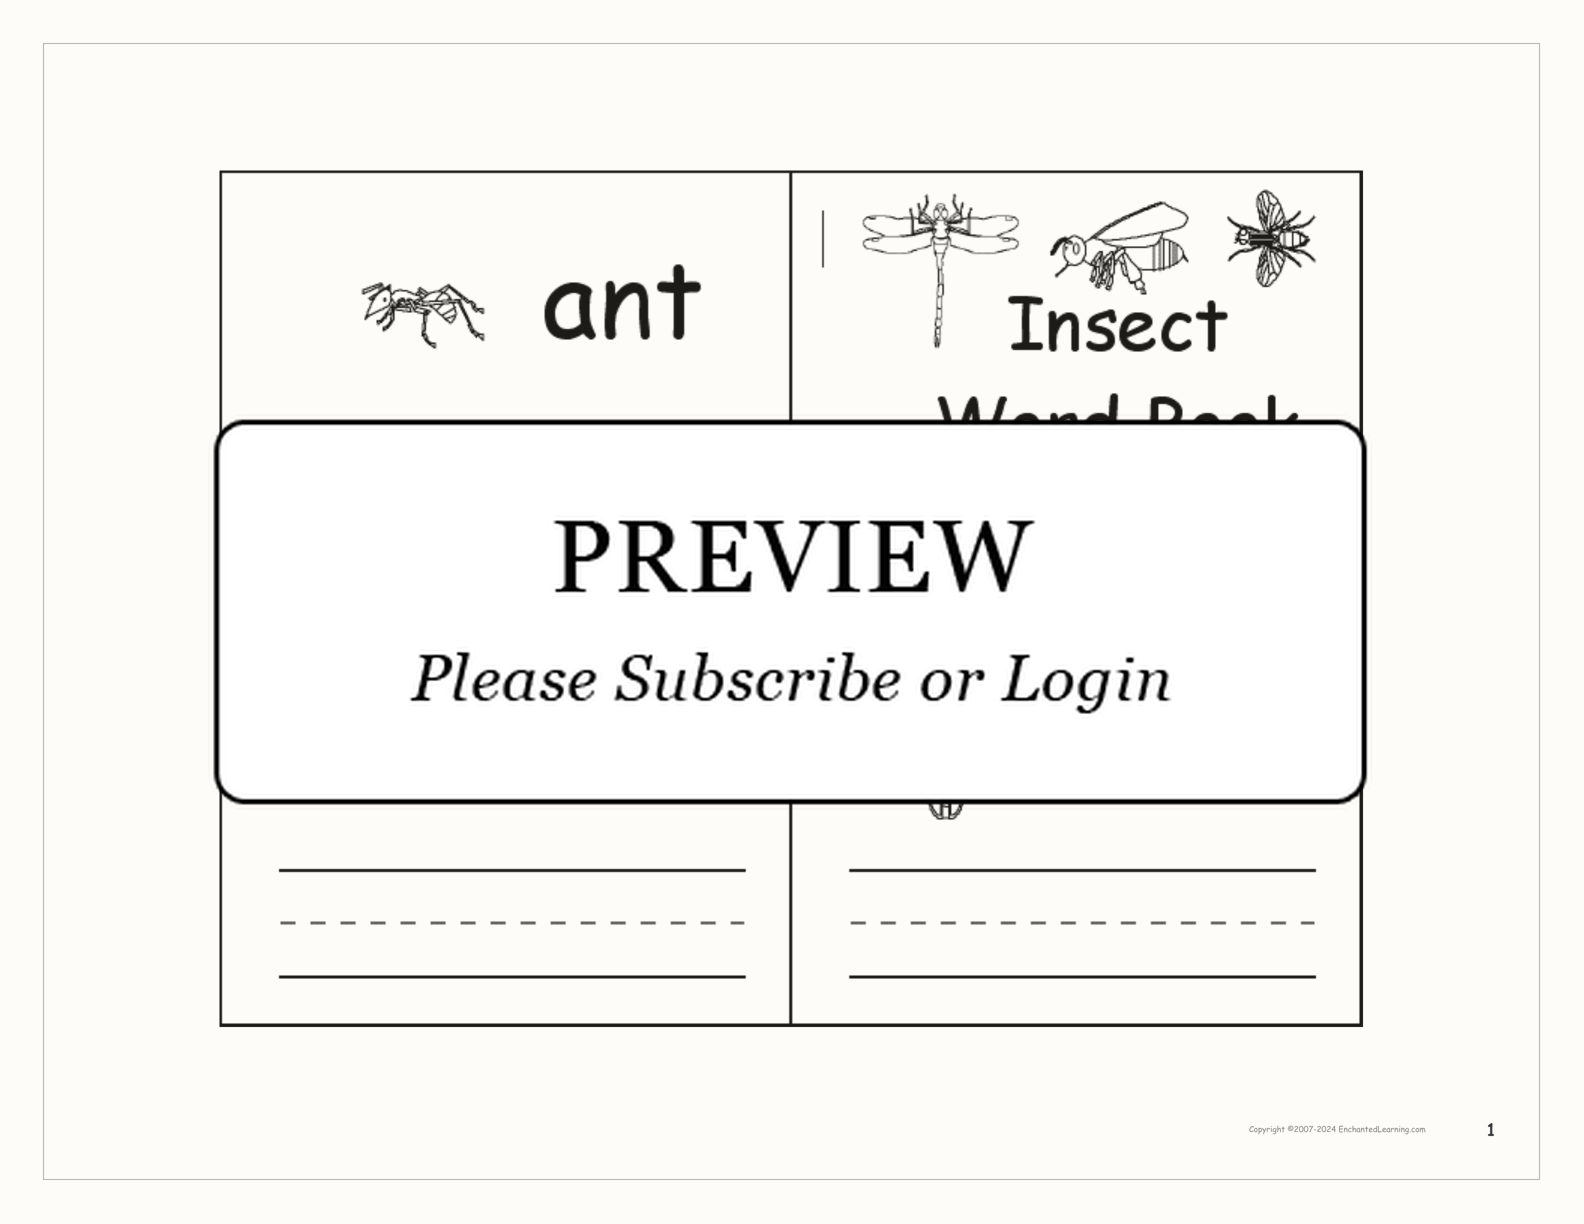 Insect Word Book interactive worksheet page 1